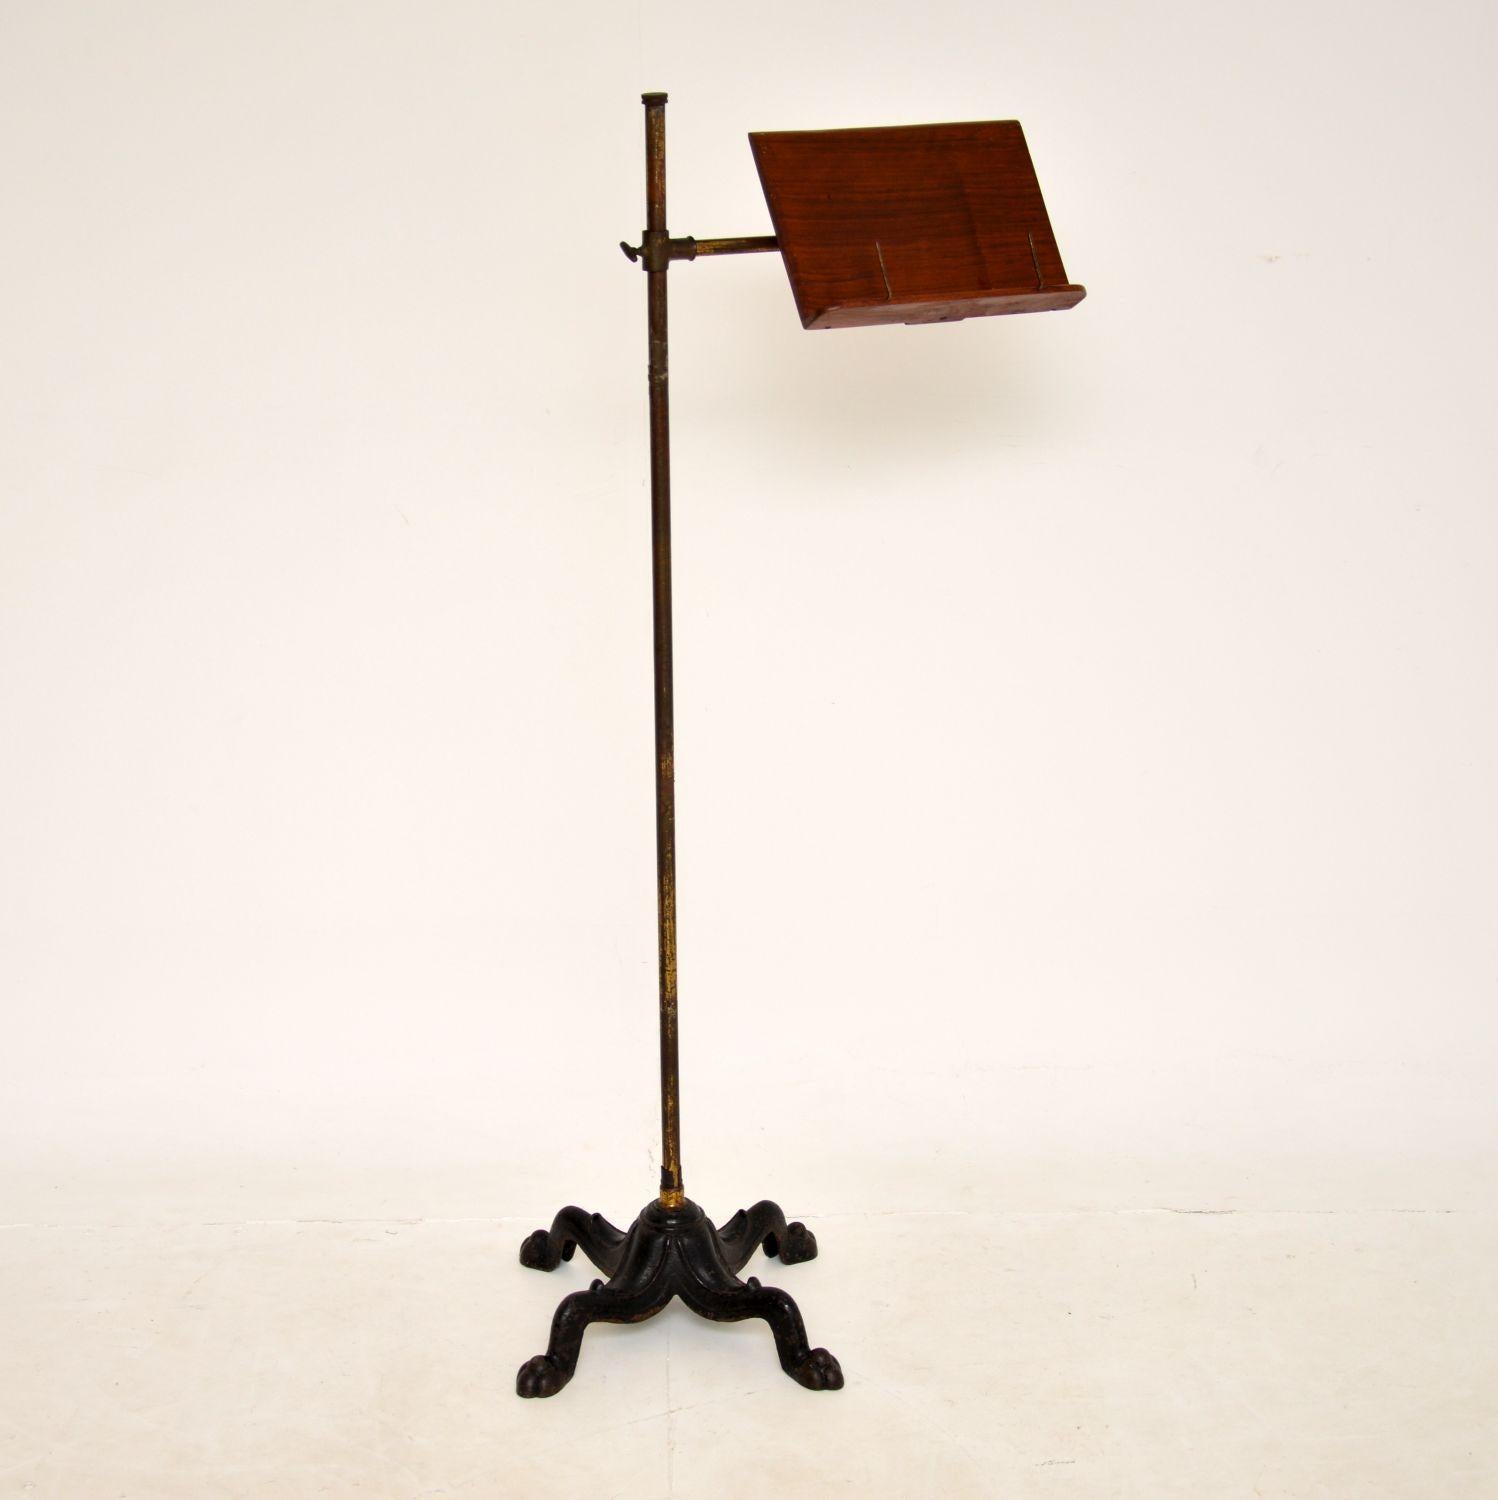 A superb antique Victorian period reading stand in walnut. This was made in England & dates from around the 1860-1880’s period.

It is a lovely size, and of great quality. It is perfectly sized to be used as a music stand, a reading stand over a